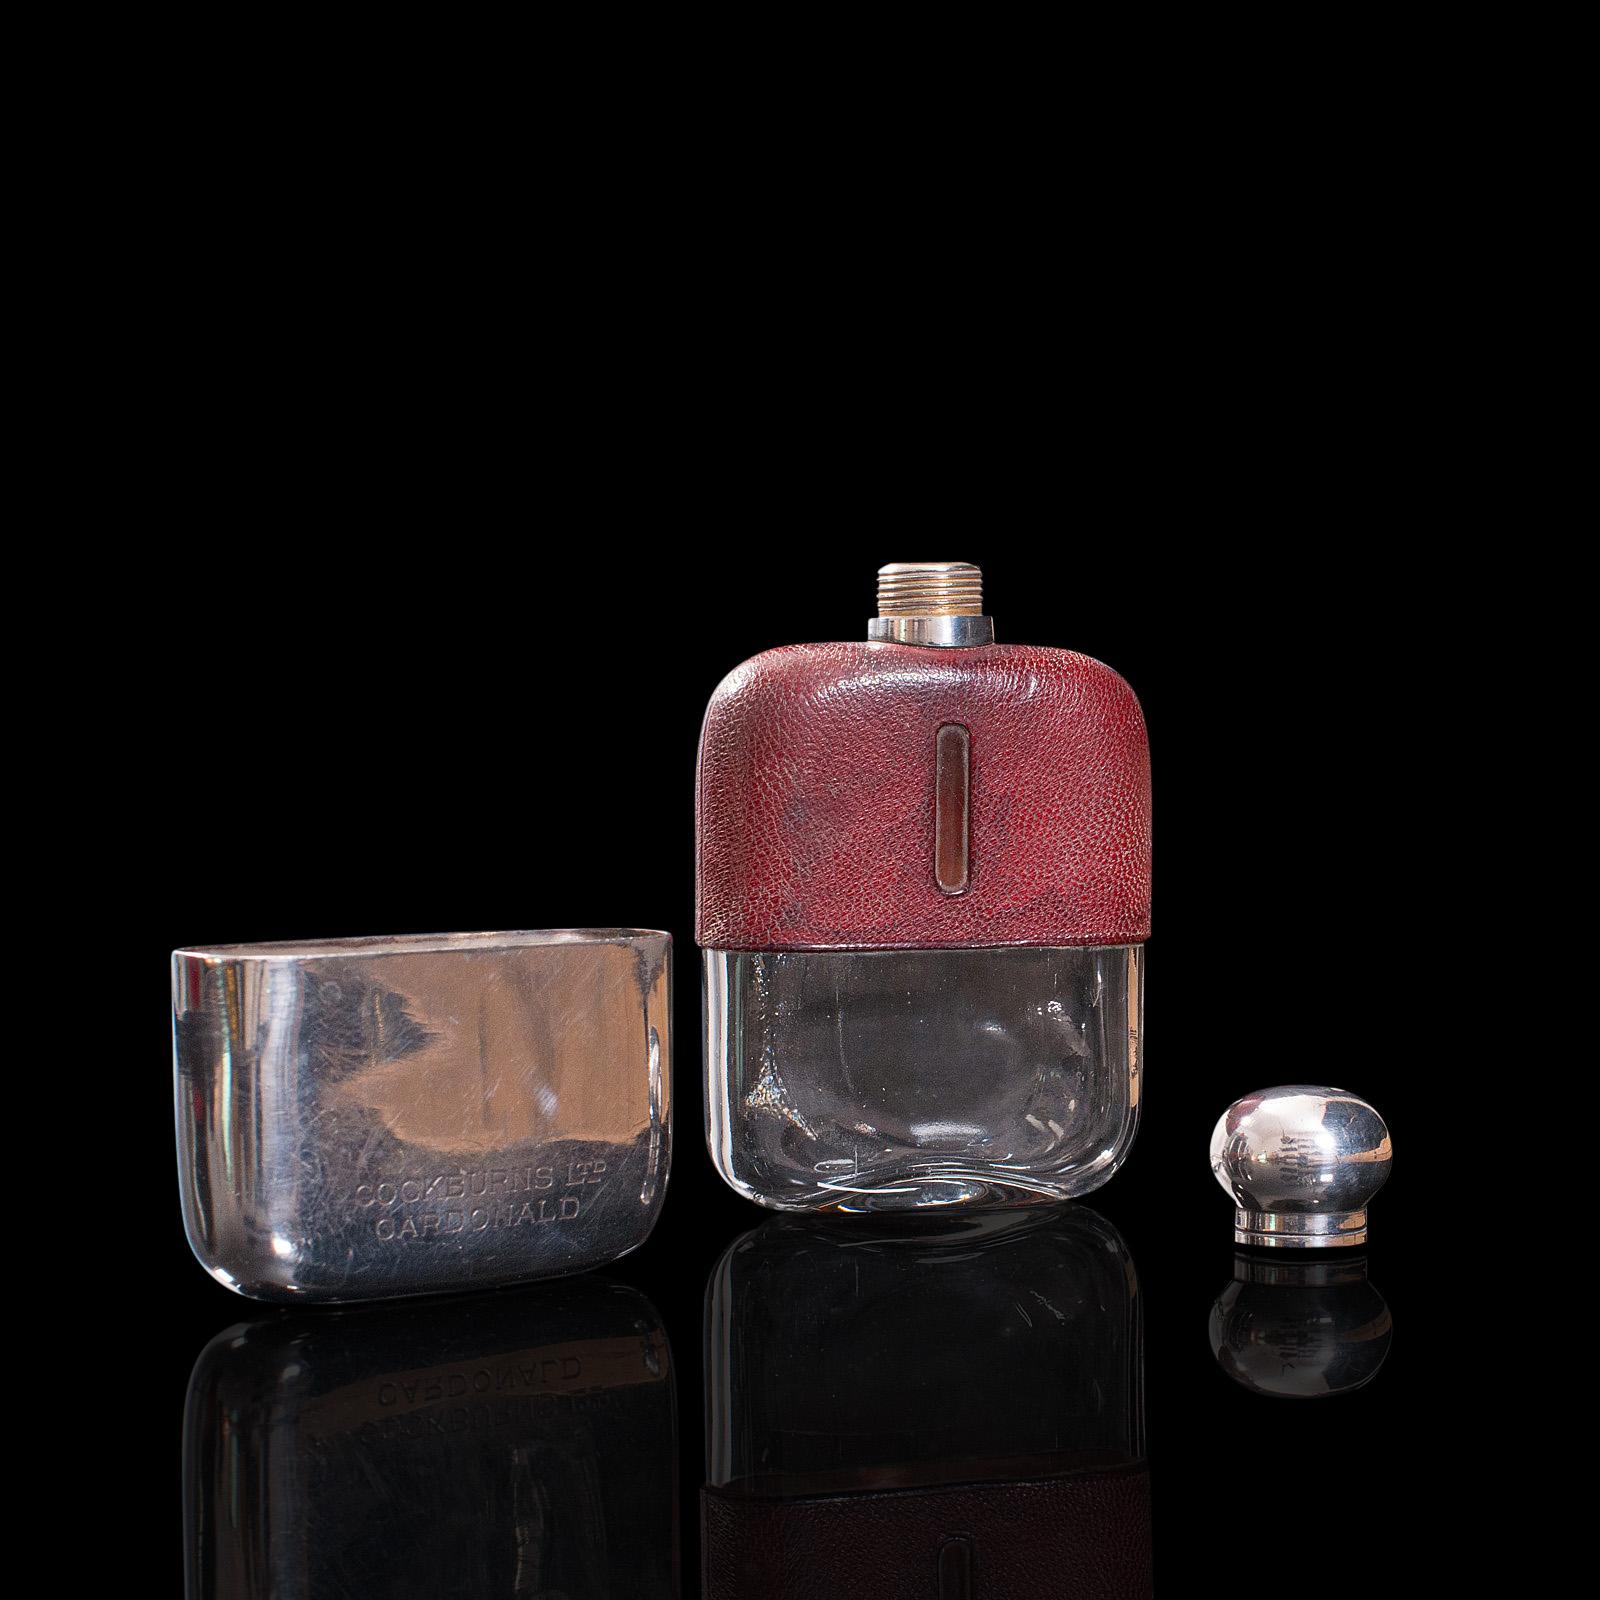 This is an antique hip flask. An English, leather bound, glass and silver plated retirement or celebration gift, dating to the early 20th century, circa 1920.

Tactile in form and of usable pocket size at 3/16th of a pint
Displaying a desirable